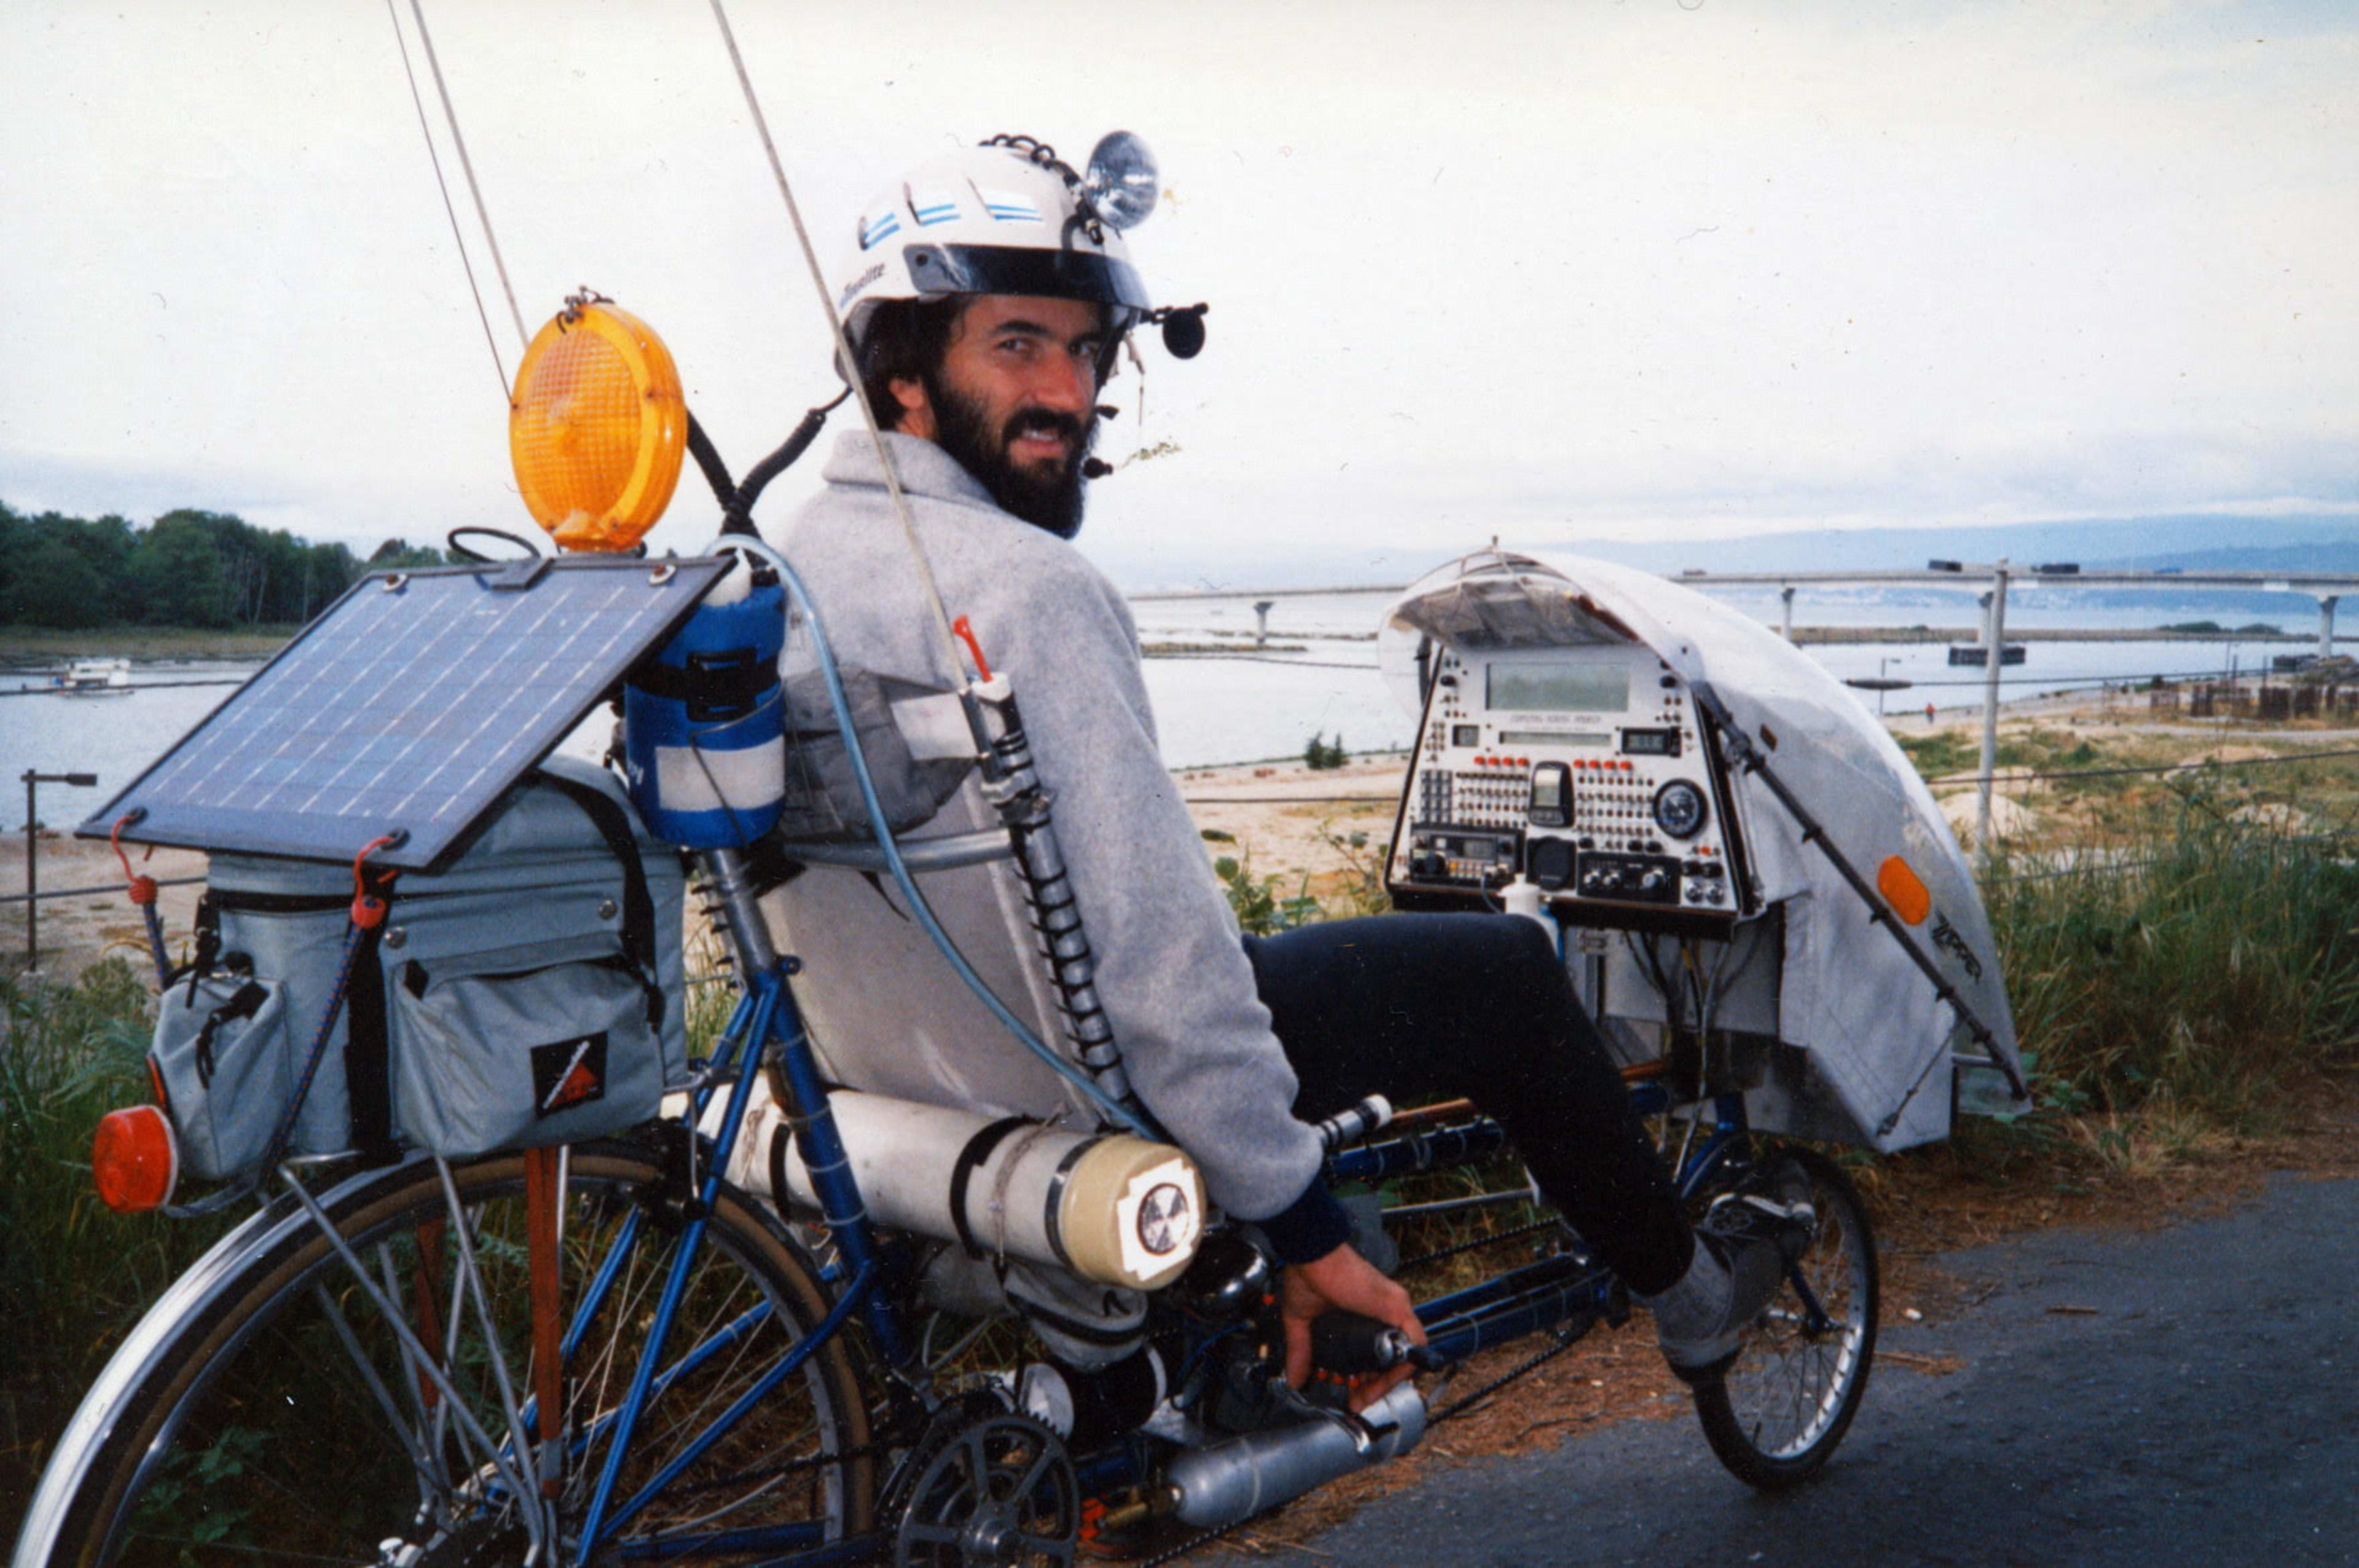 The original digital nomad turned his bike into a mobile office in 1984